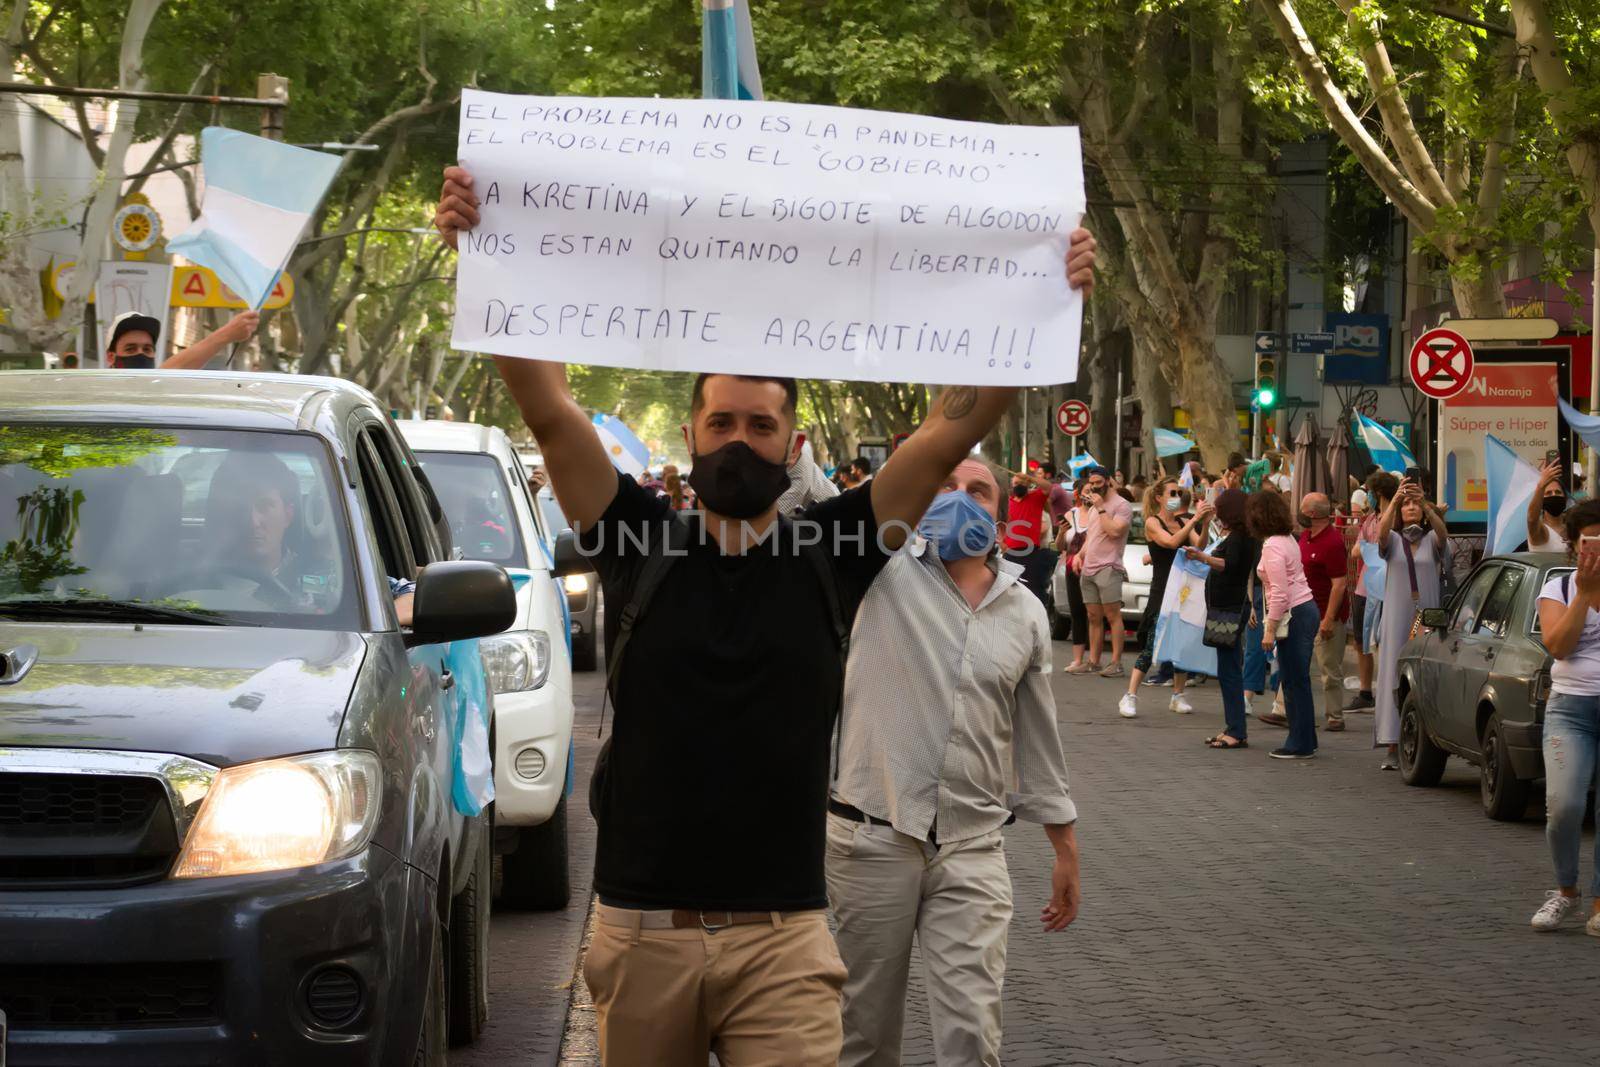 2020-10-12, Mendoza, Argentina: During a protest, a man holds a sign the reads "The problem is not the pandemic, but the government. Wake up, Argentina". by hernan_hyper